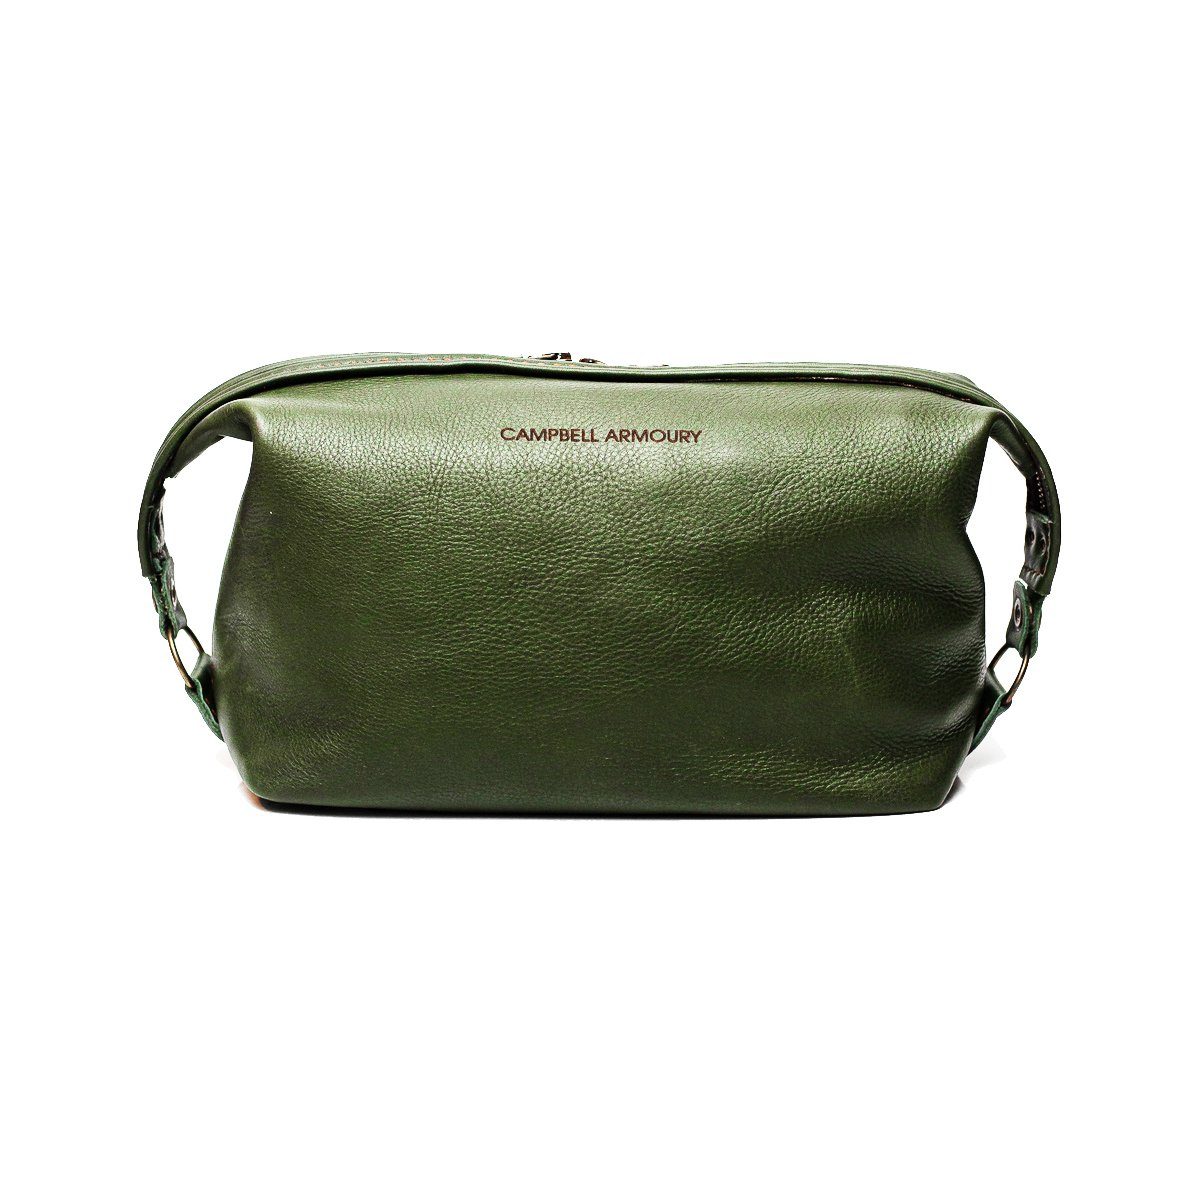 Campbell Armoury Leather Toiletry Bag Bags & Handbags Campbell Armoury olive 